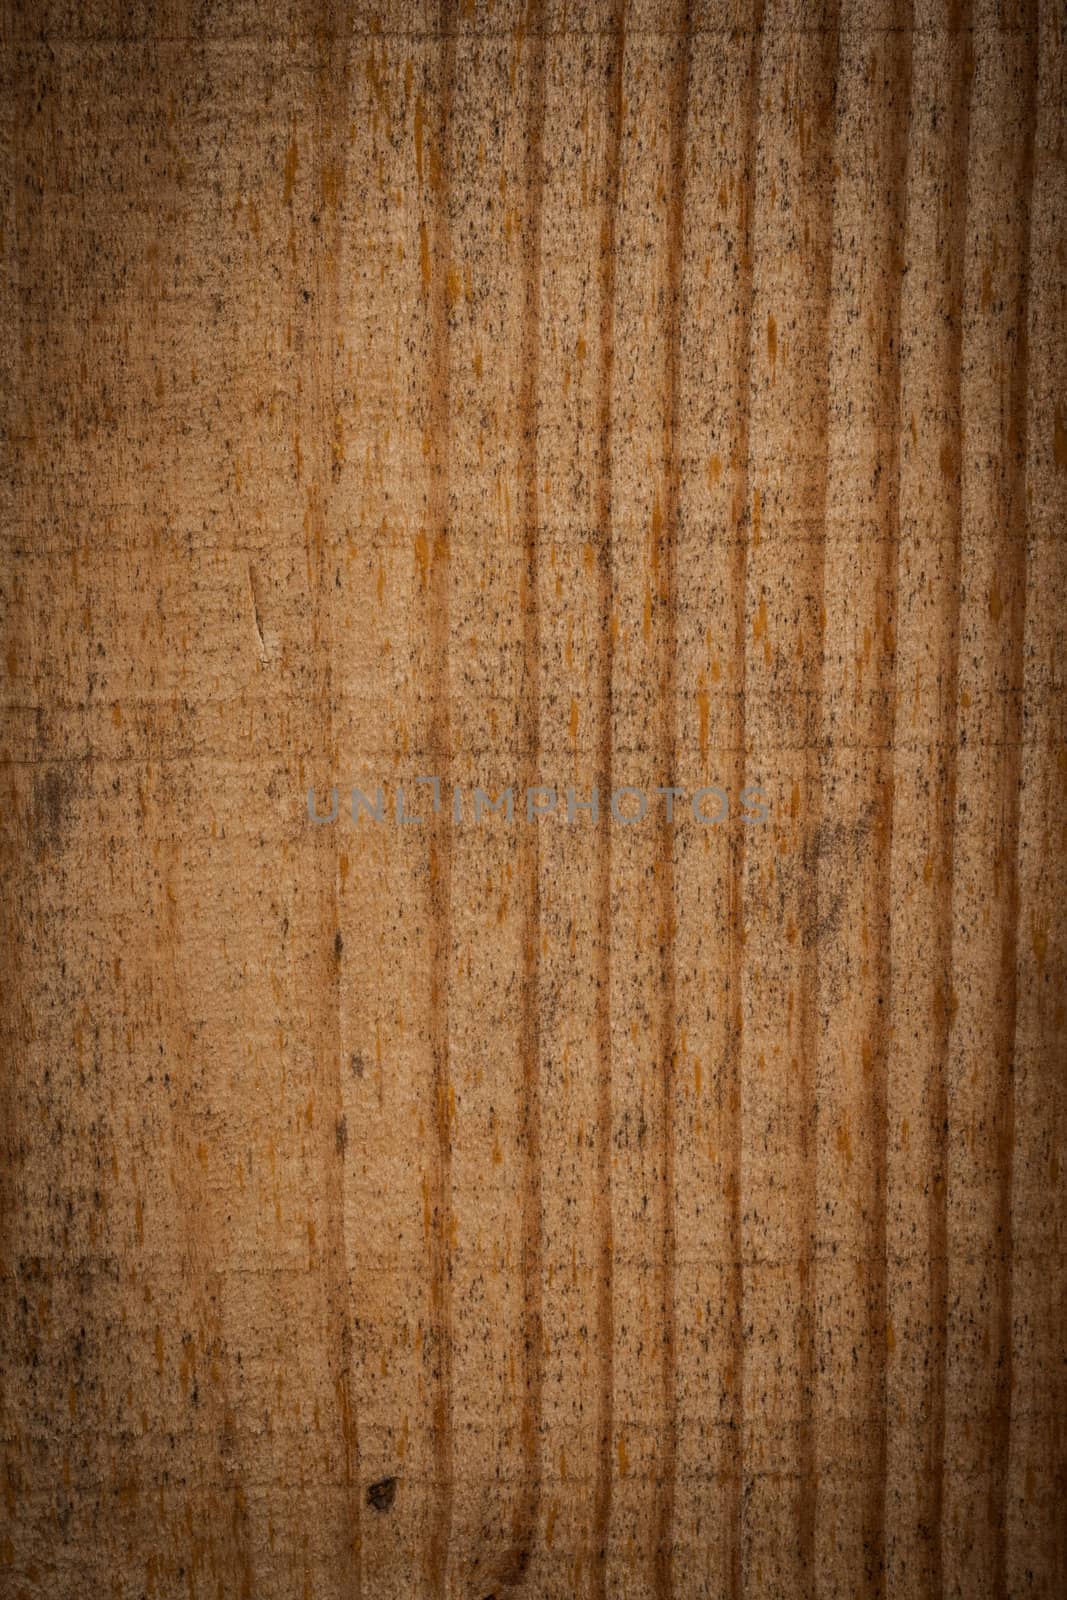 A close-up image of a wooden board texture backgroud. Check out other textures in my portfolio.